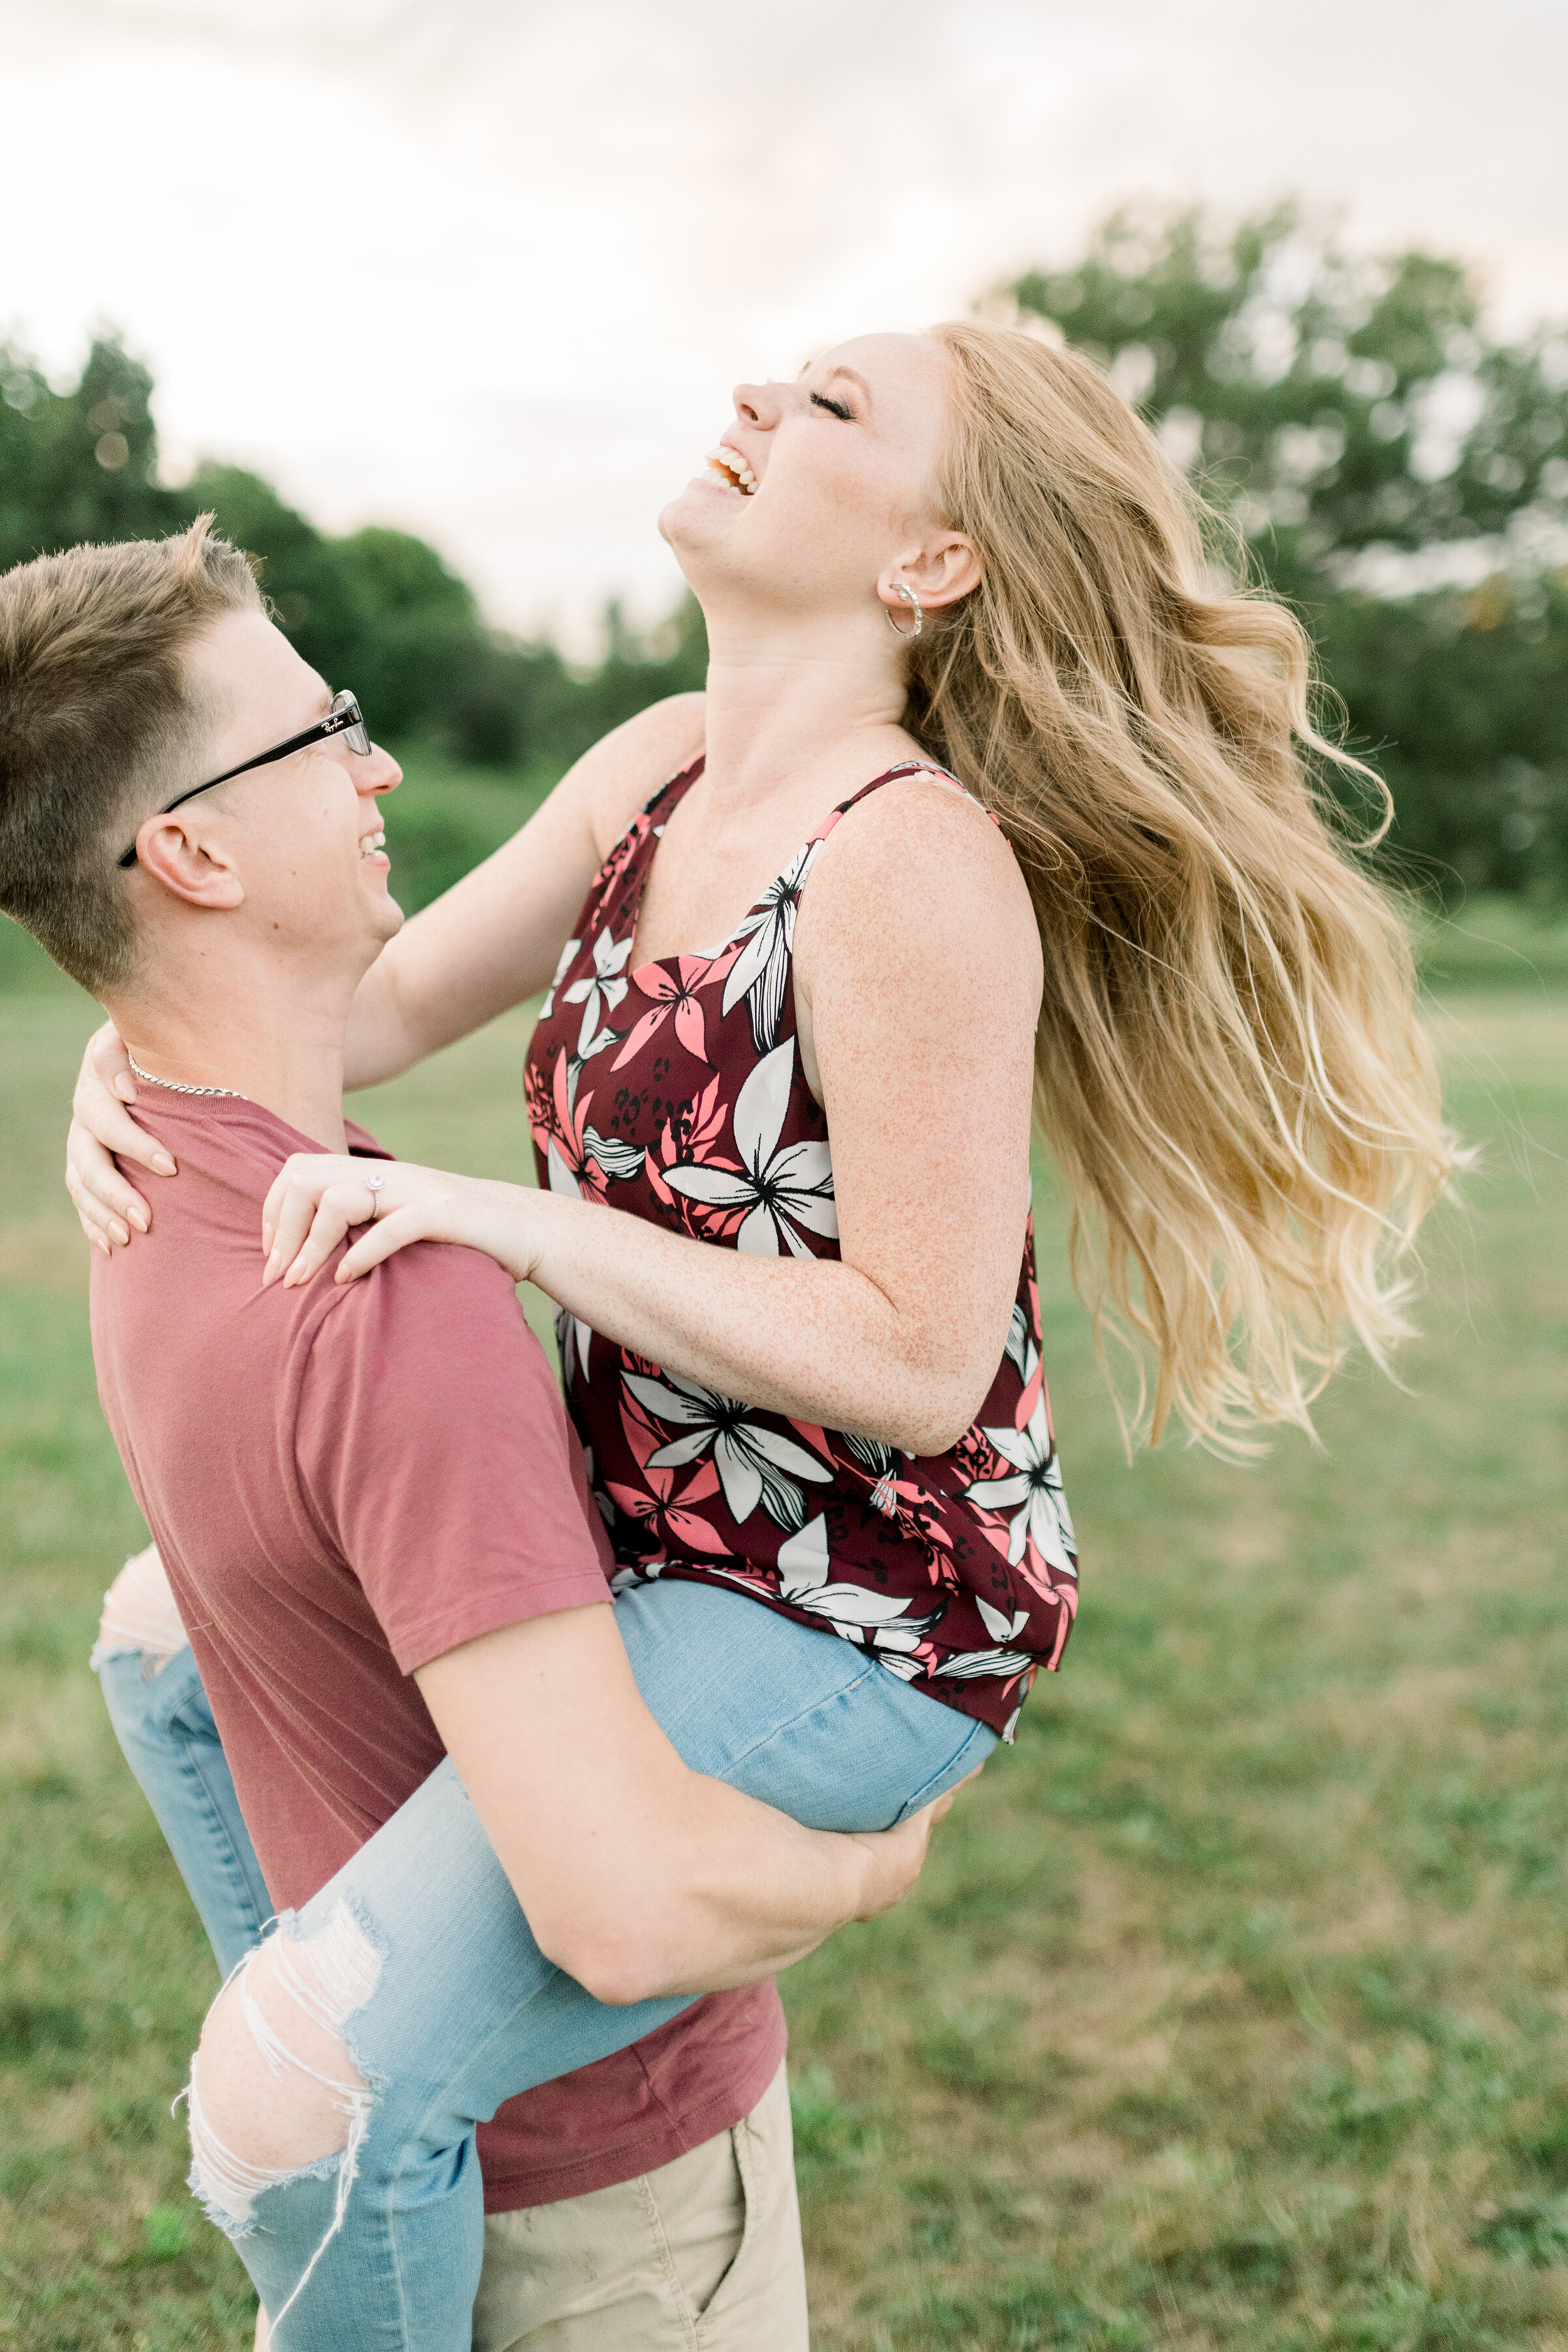  A glowing woman laughs as her fiancé lifts her off the ground in a playful engagement session at Dominion Arboretum in Ottawa by professional engagement photographer Chelsea Mason Photography. Engagement session couple pose inspiration ideas and goa